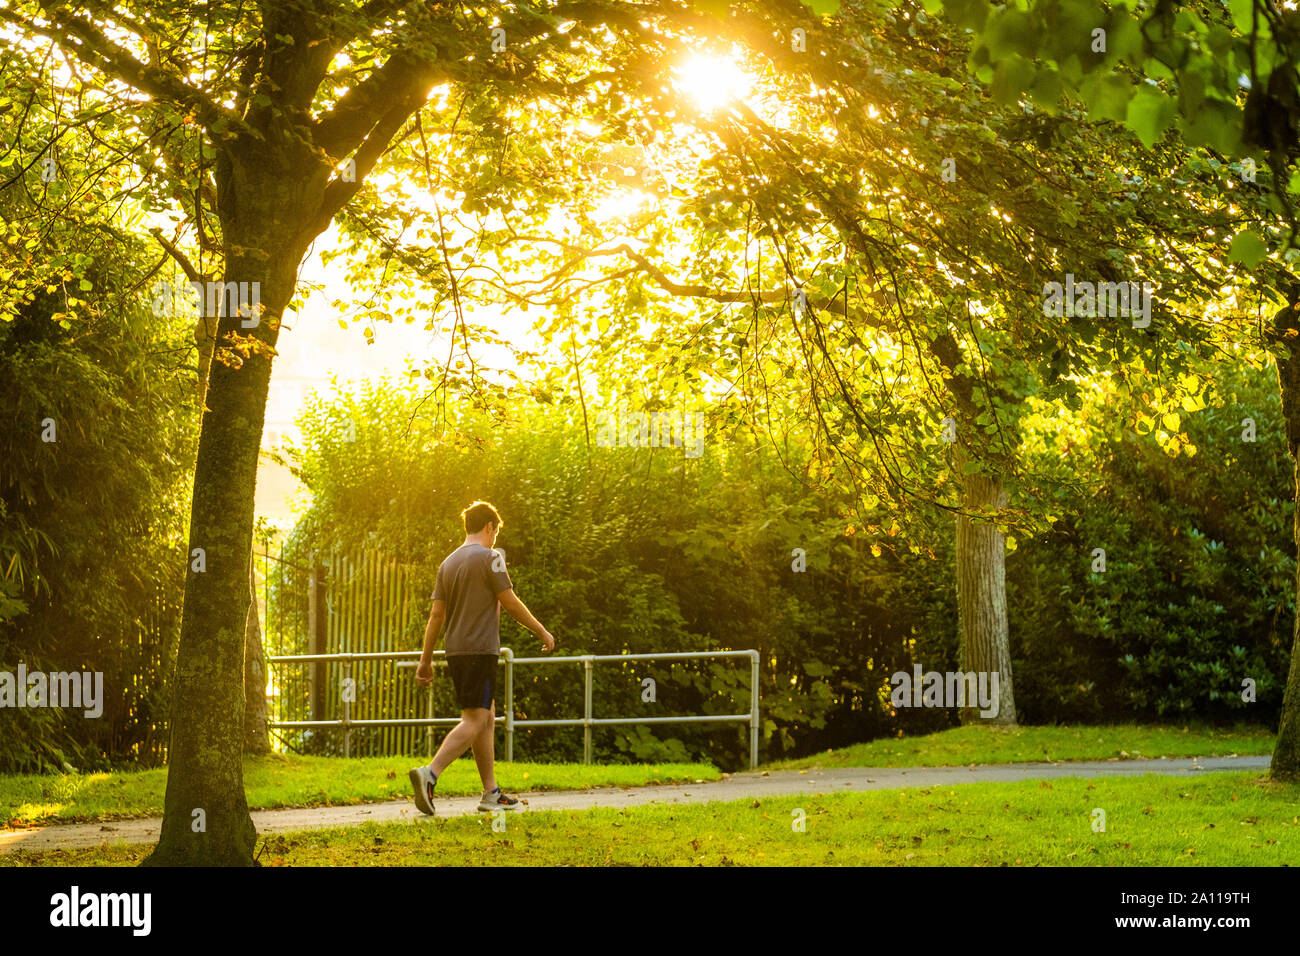 Aberystwyth, Wales, UK. 23rd Sept, 2019. UK Weather: A man walking down Plascrug Avenue at daybreak on a bright and sunny Equinox morning, September 23 2019, the first day of official autumn in the northern hemisphere. Today the length of the day and night are roughy equal. Photo Credit: keith morris/Alamy Live News Stock Photo